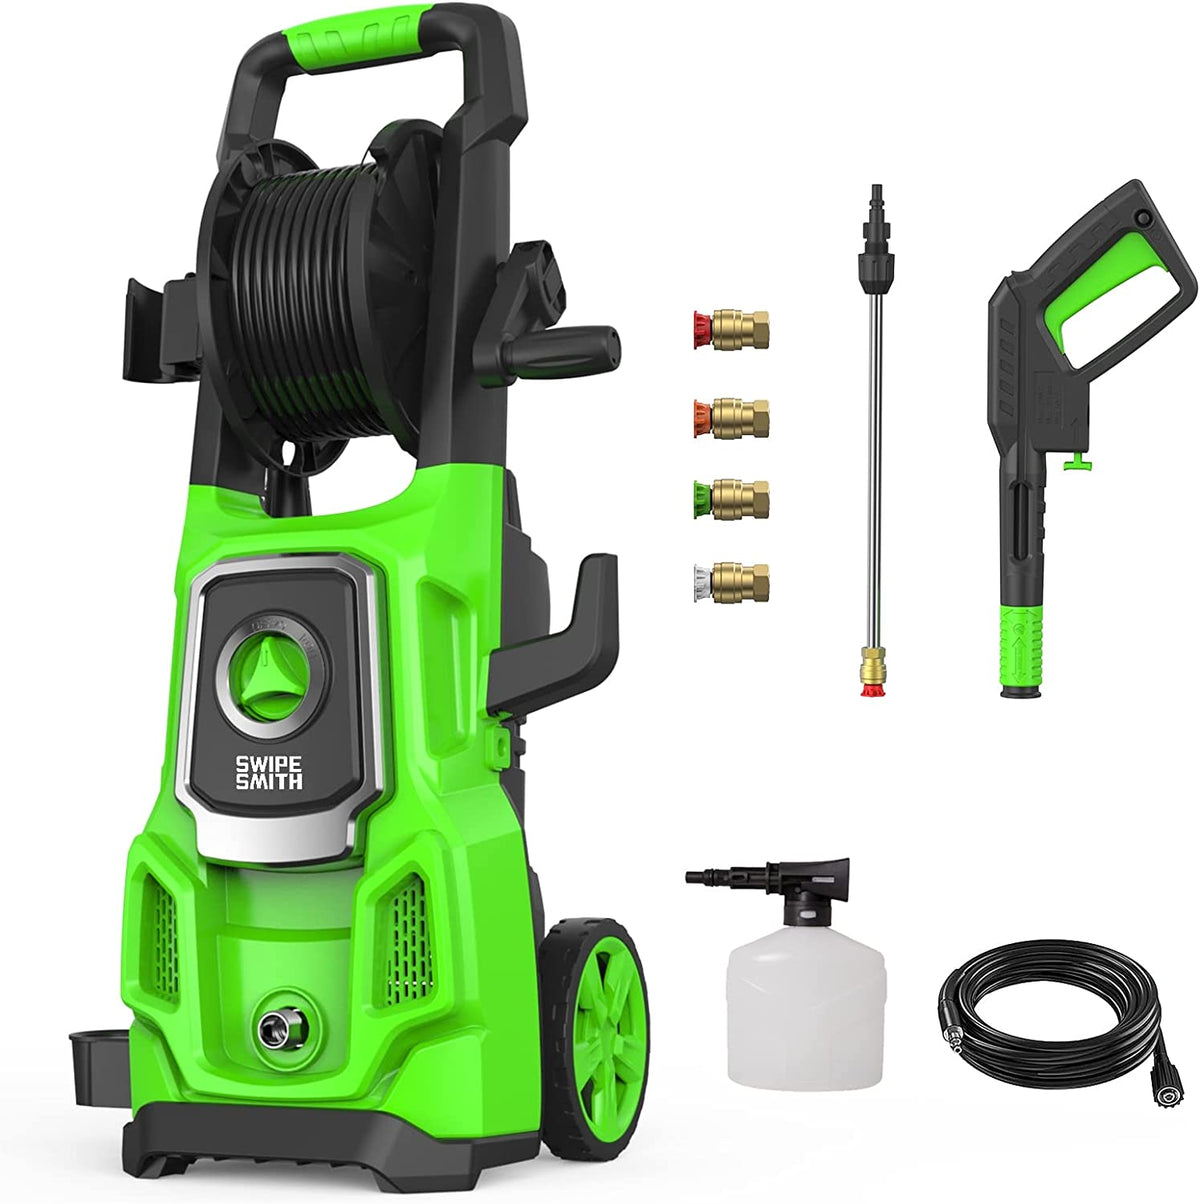 Electric Pressure Washer, SWIPESMITH 3000 Max PSI, 2.6 GPM Power Washer Machine with Hose Reel